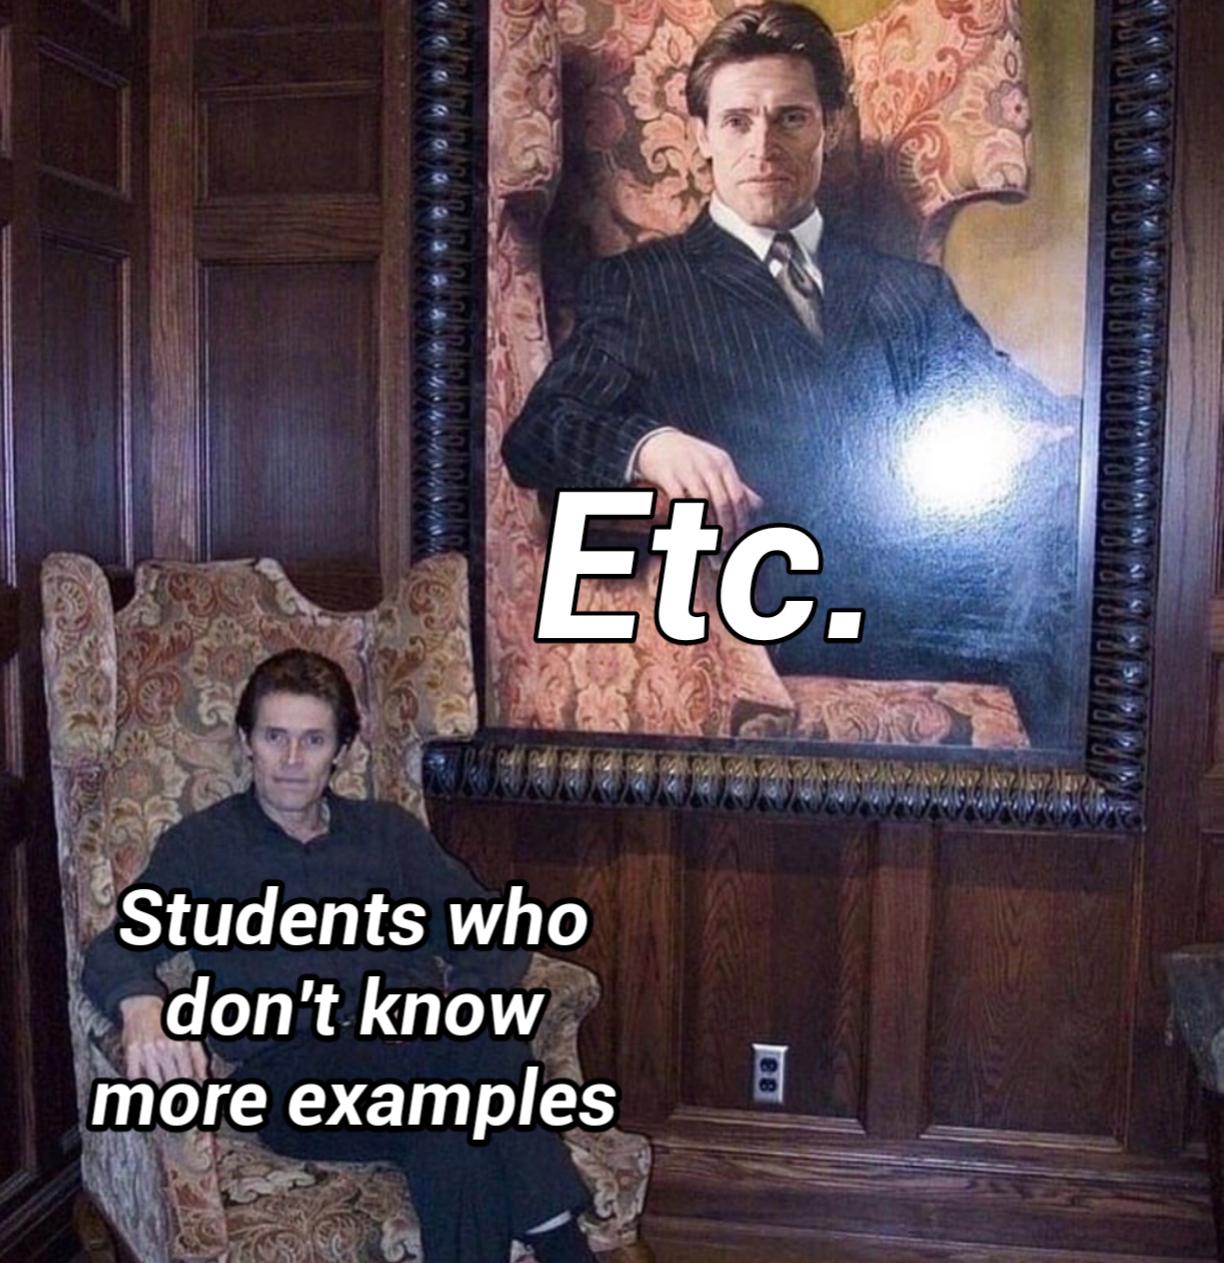 dank memes, funny memes - willem dafoe spiderman meme - Etc. Students who don't know more examples